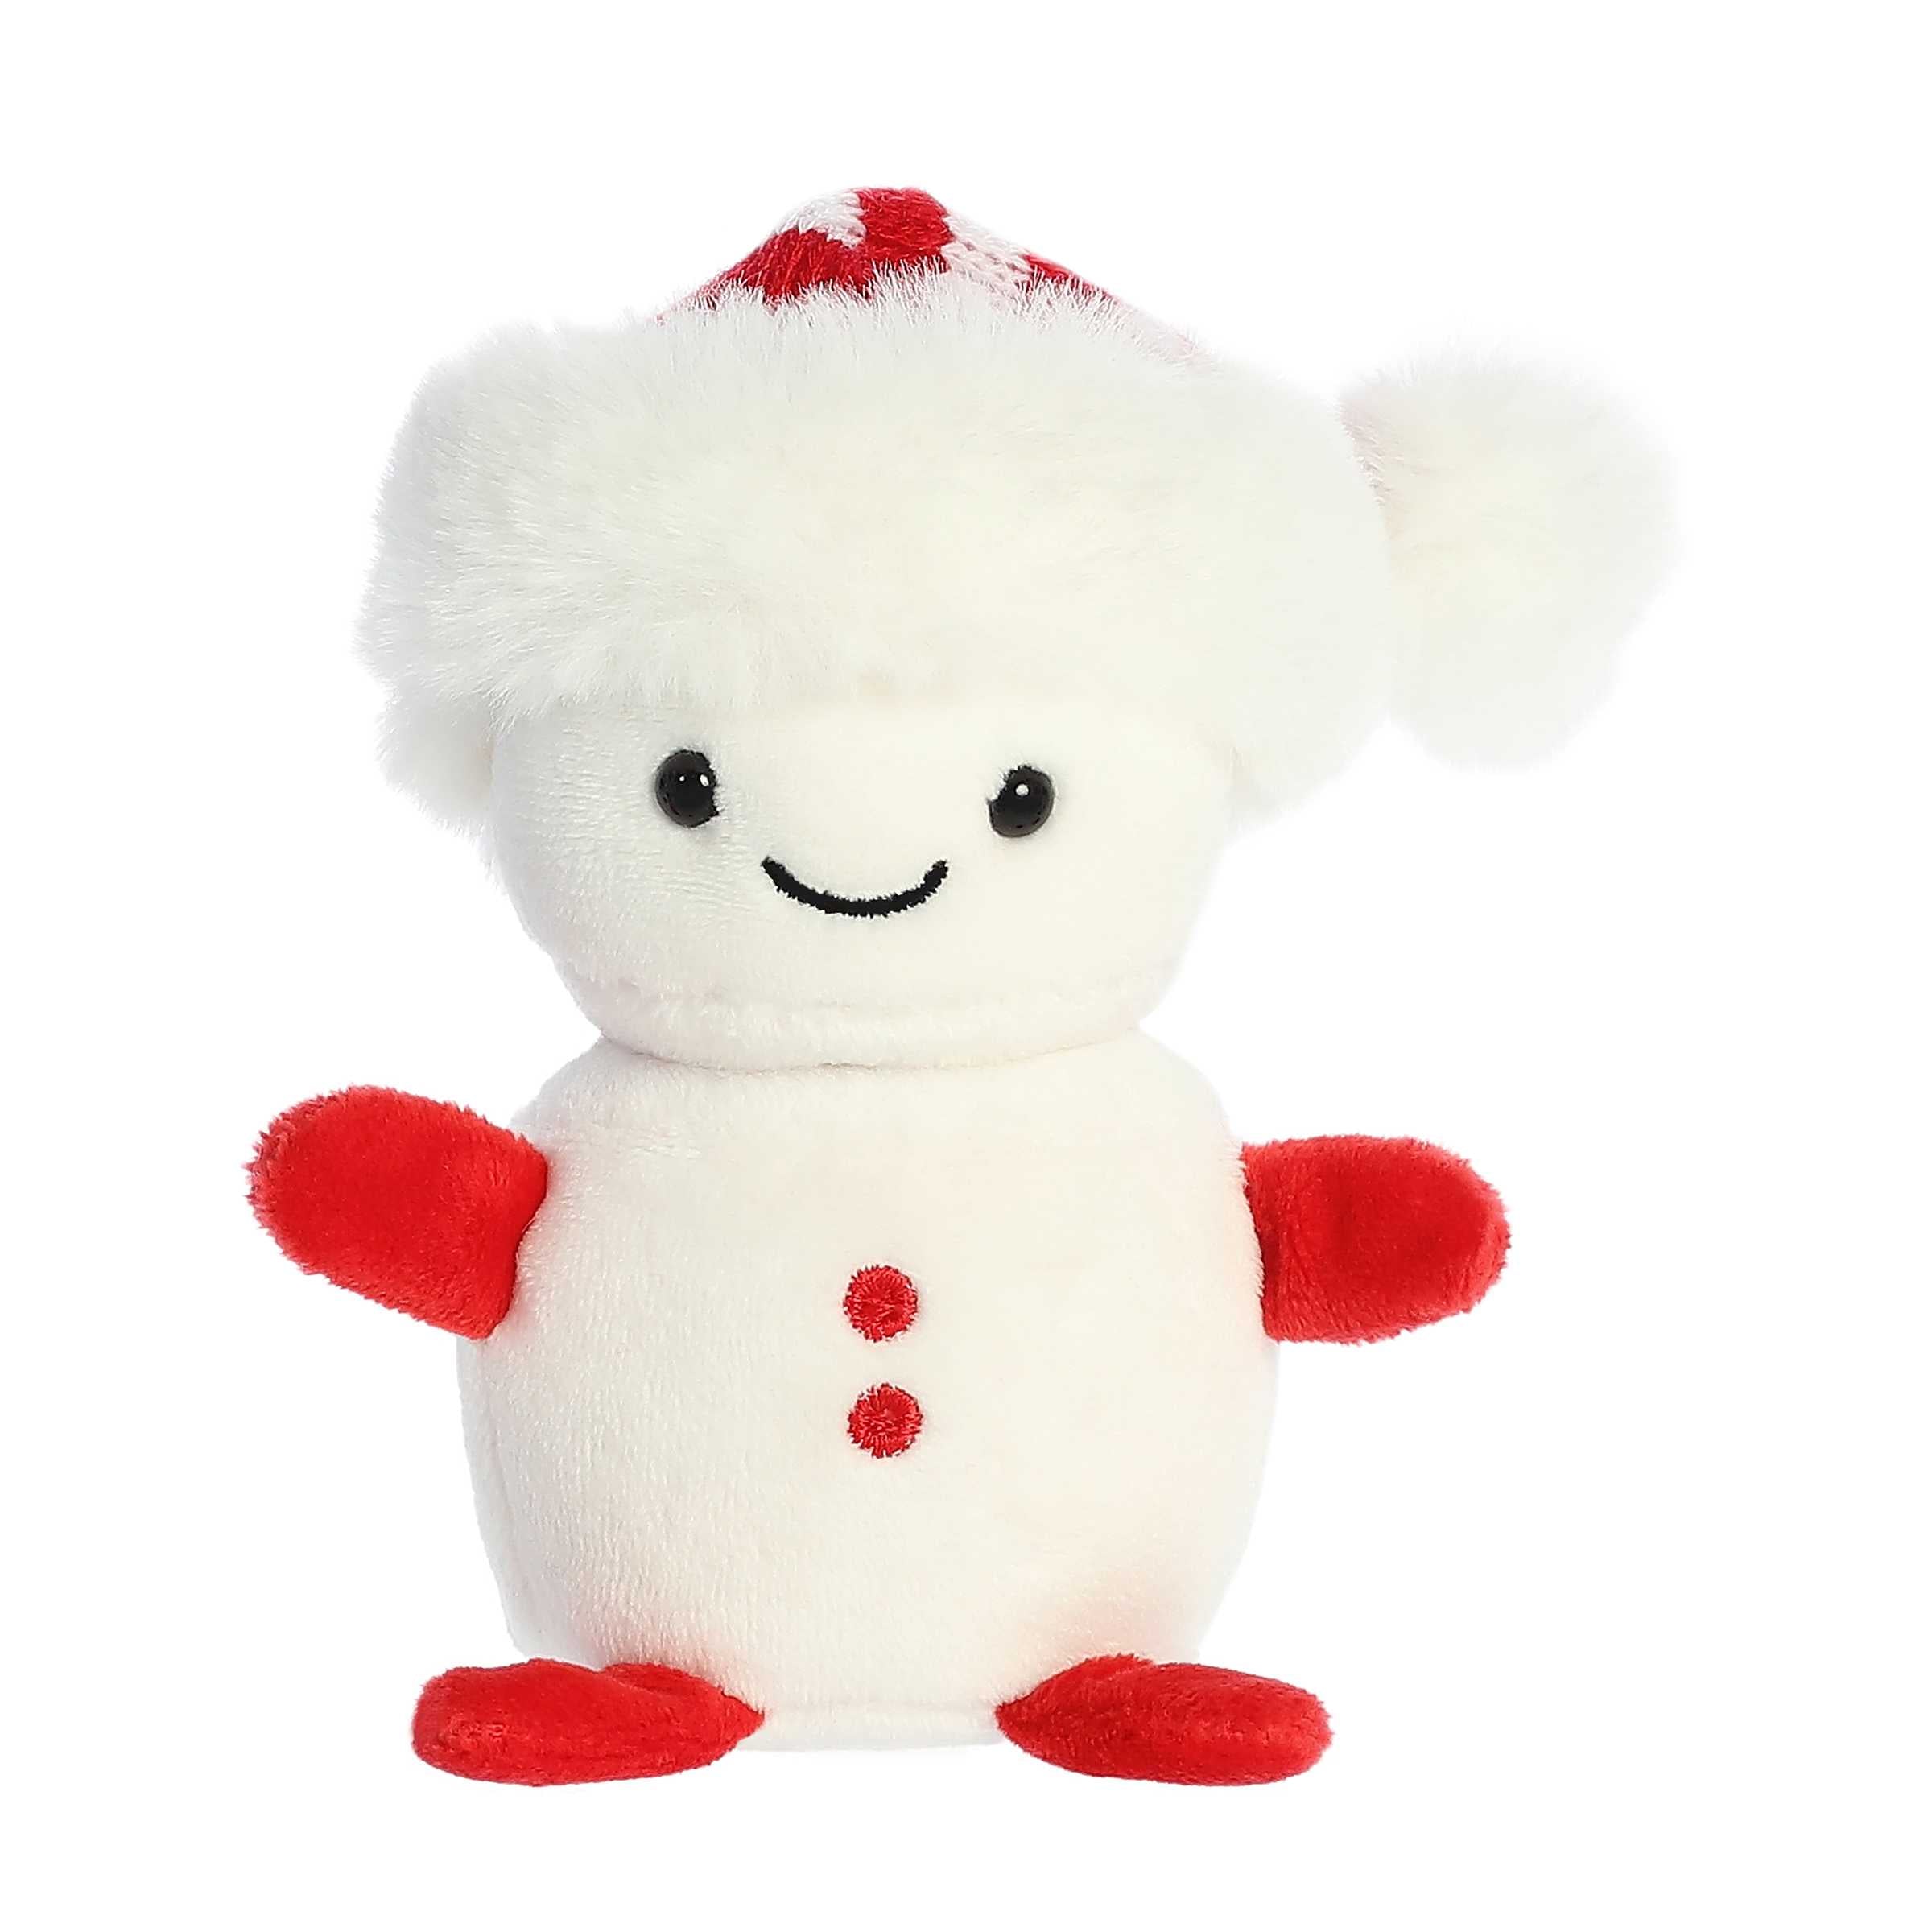 Smiling mini white snowman plushie with tiny red arms and legs wearing a red and white striped santa hat